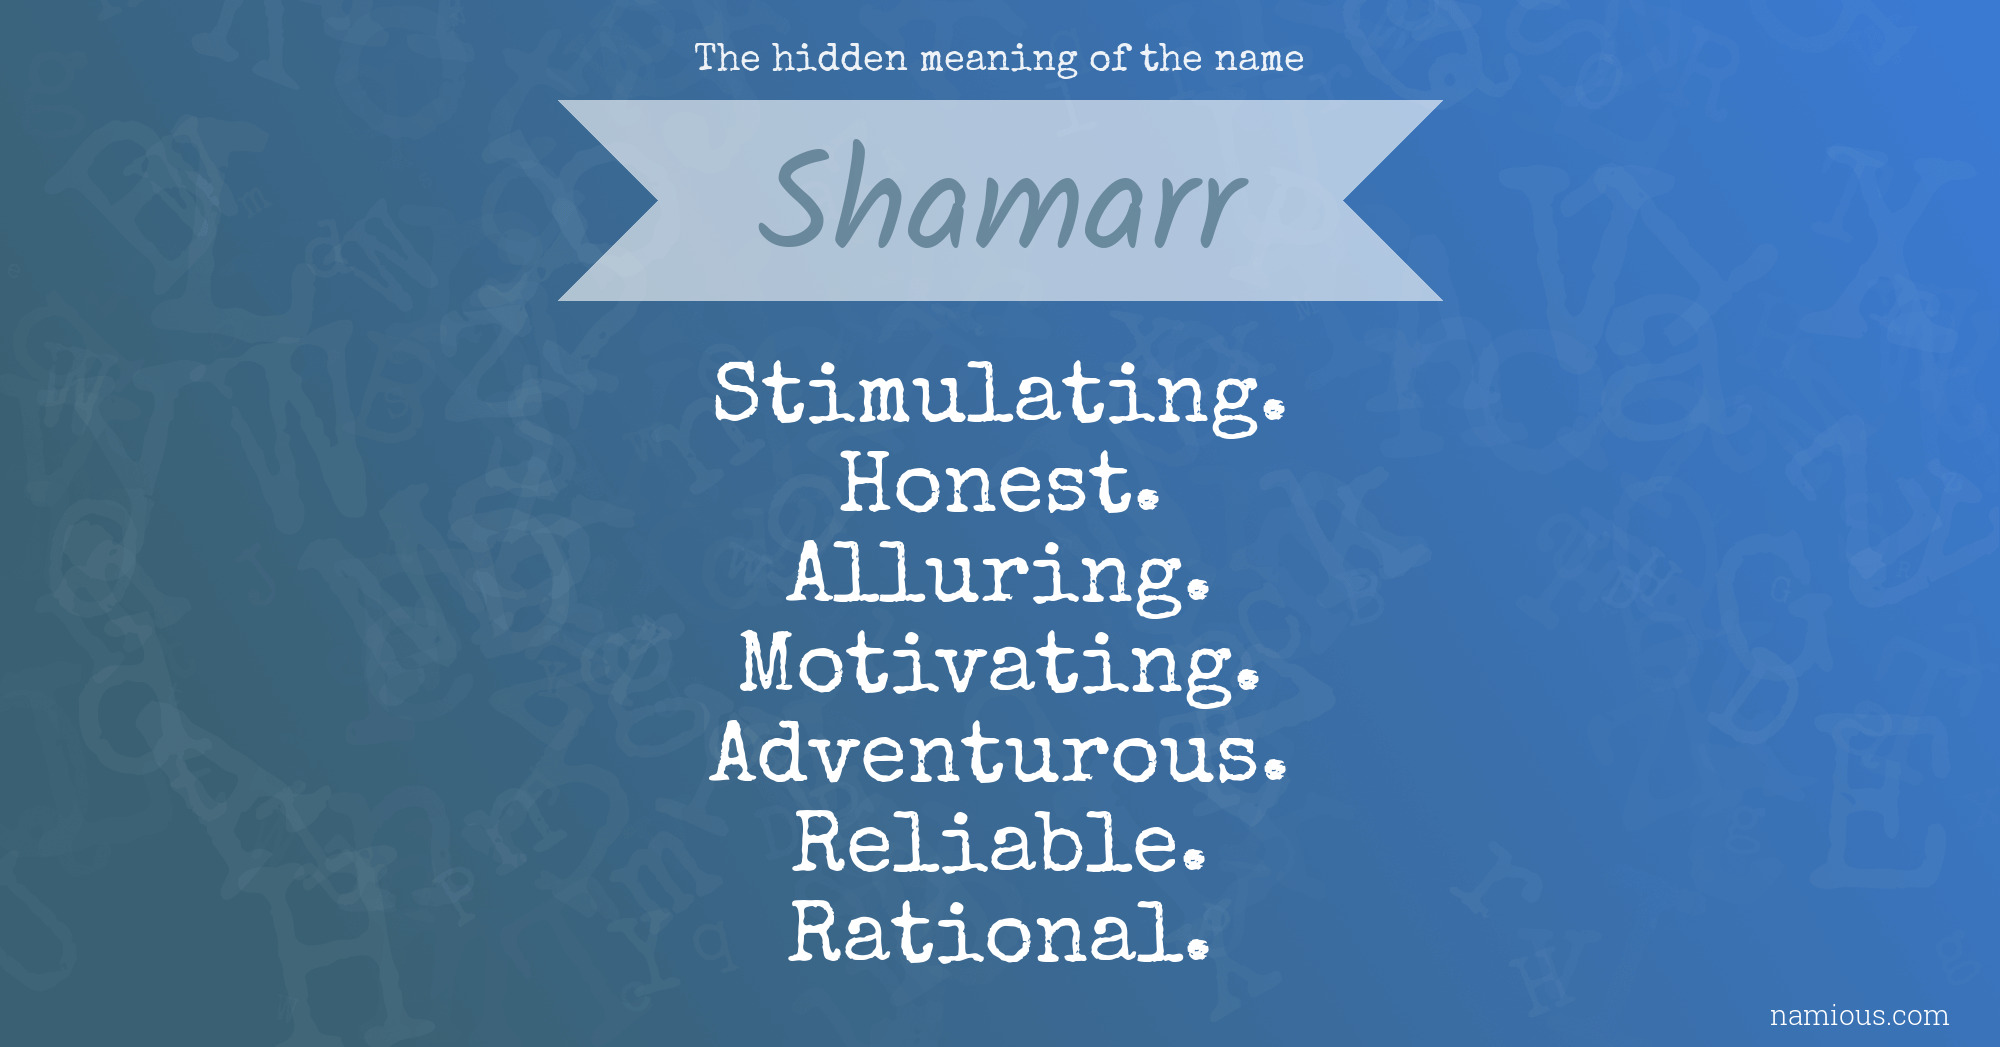 The hidden meaning of the name Shamarr